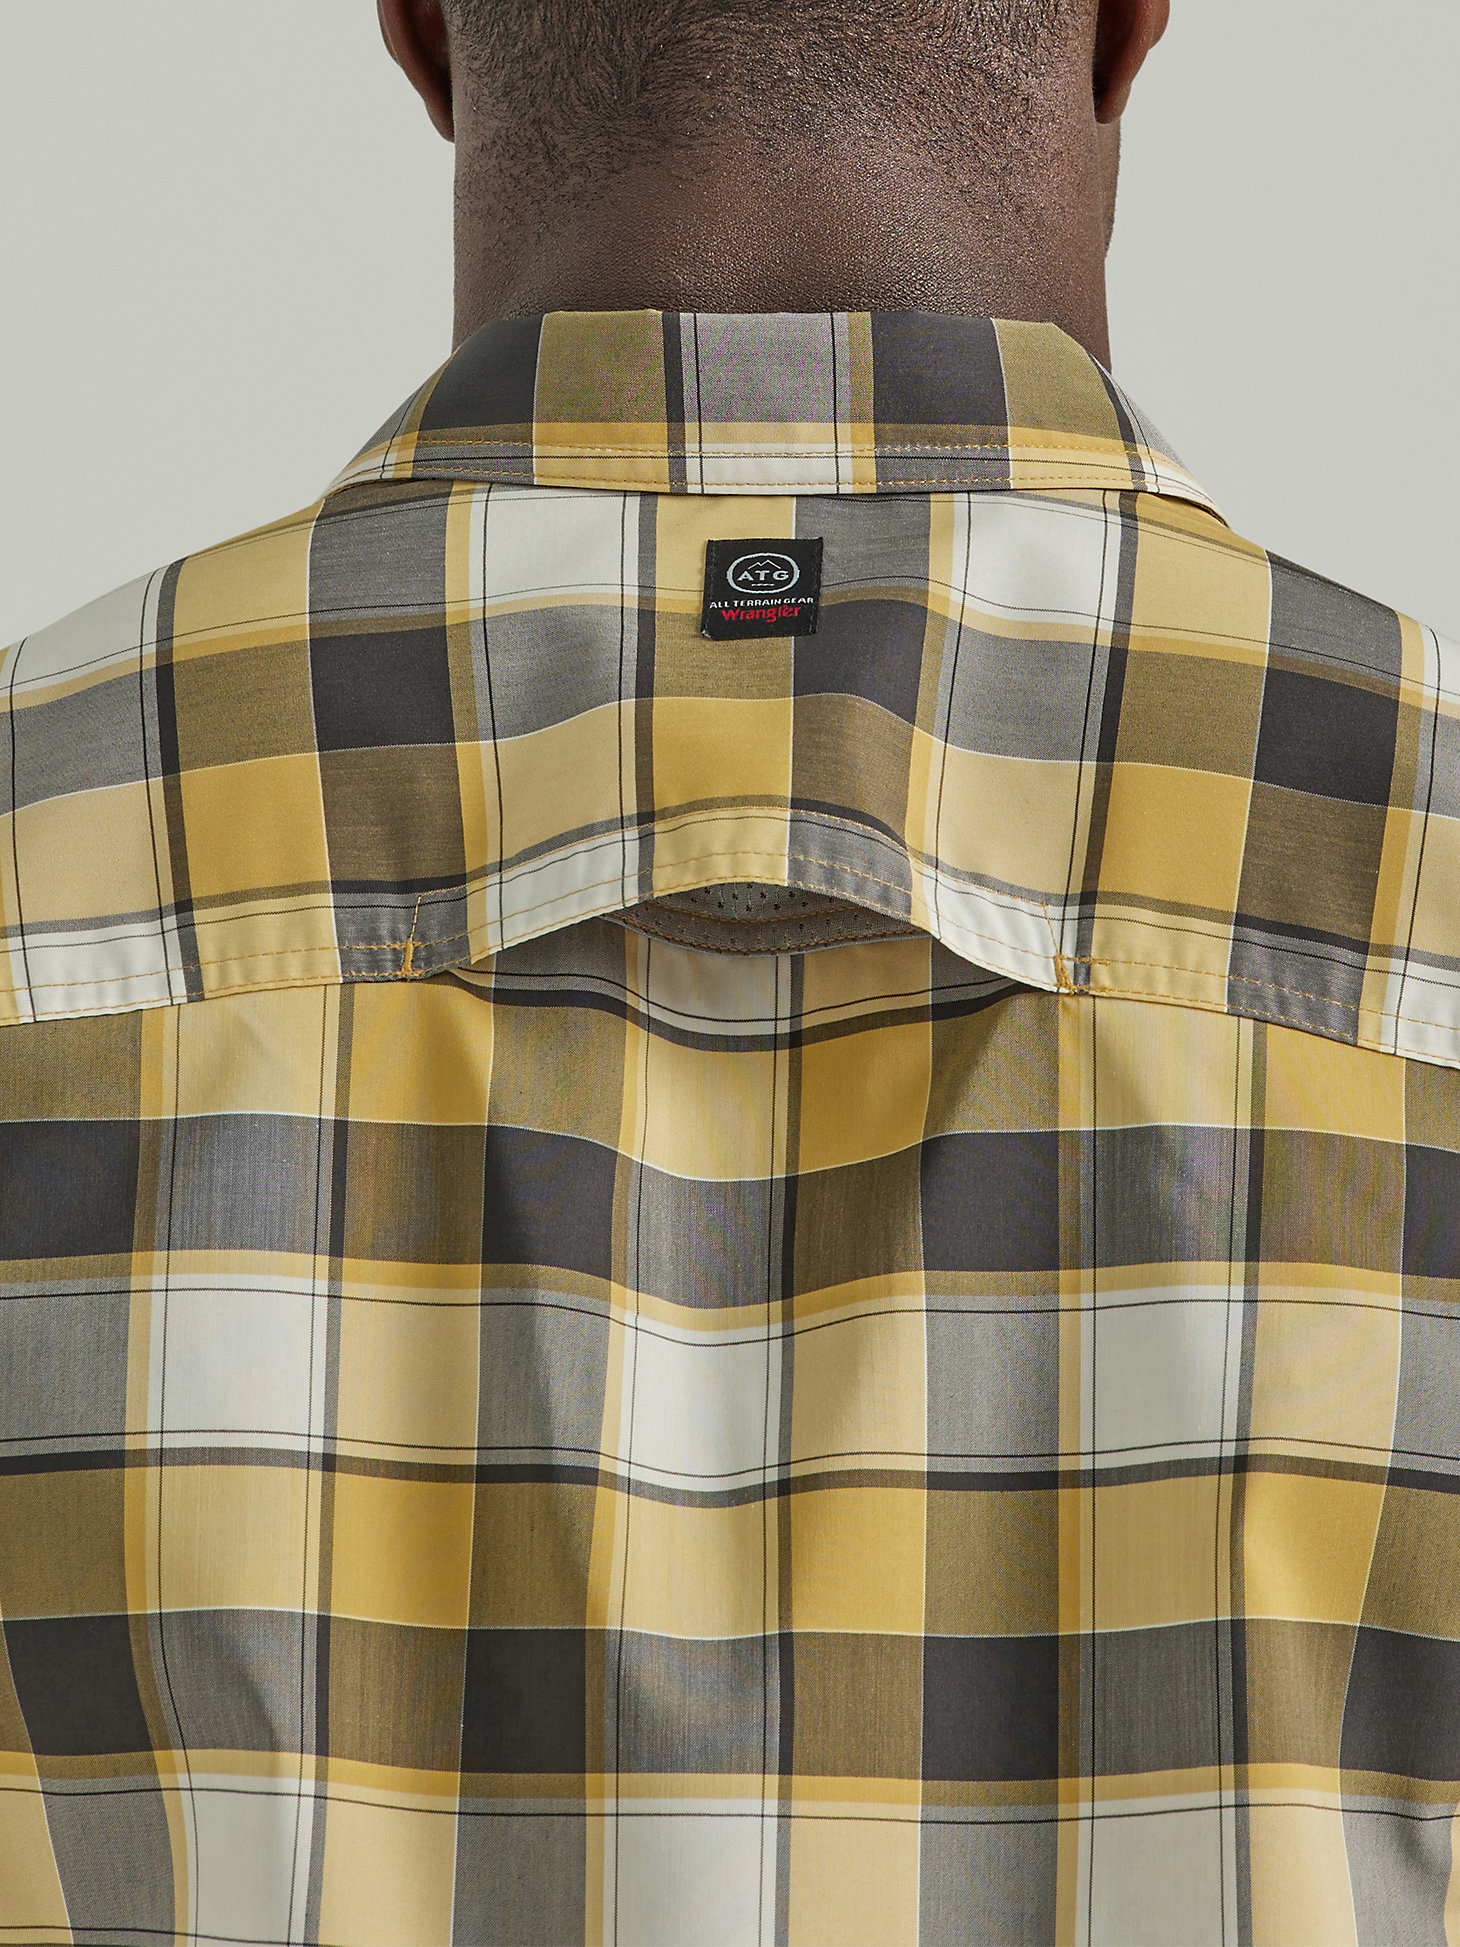 ATG By Wrangler™ Plaid Mixed Material Shirt in Travertine alternative view 6